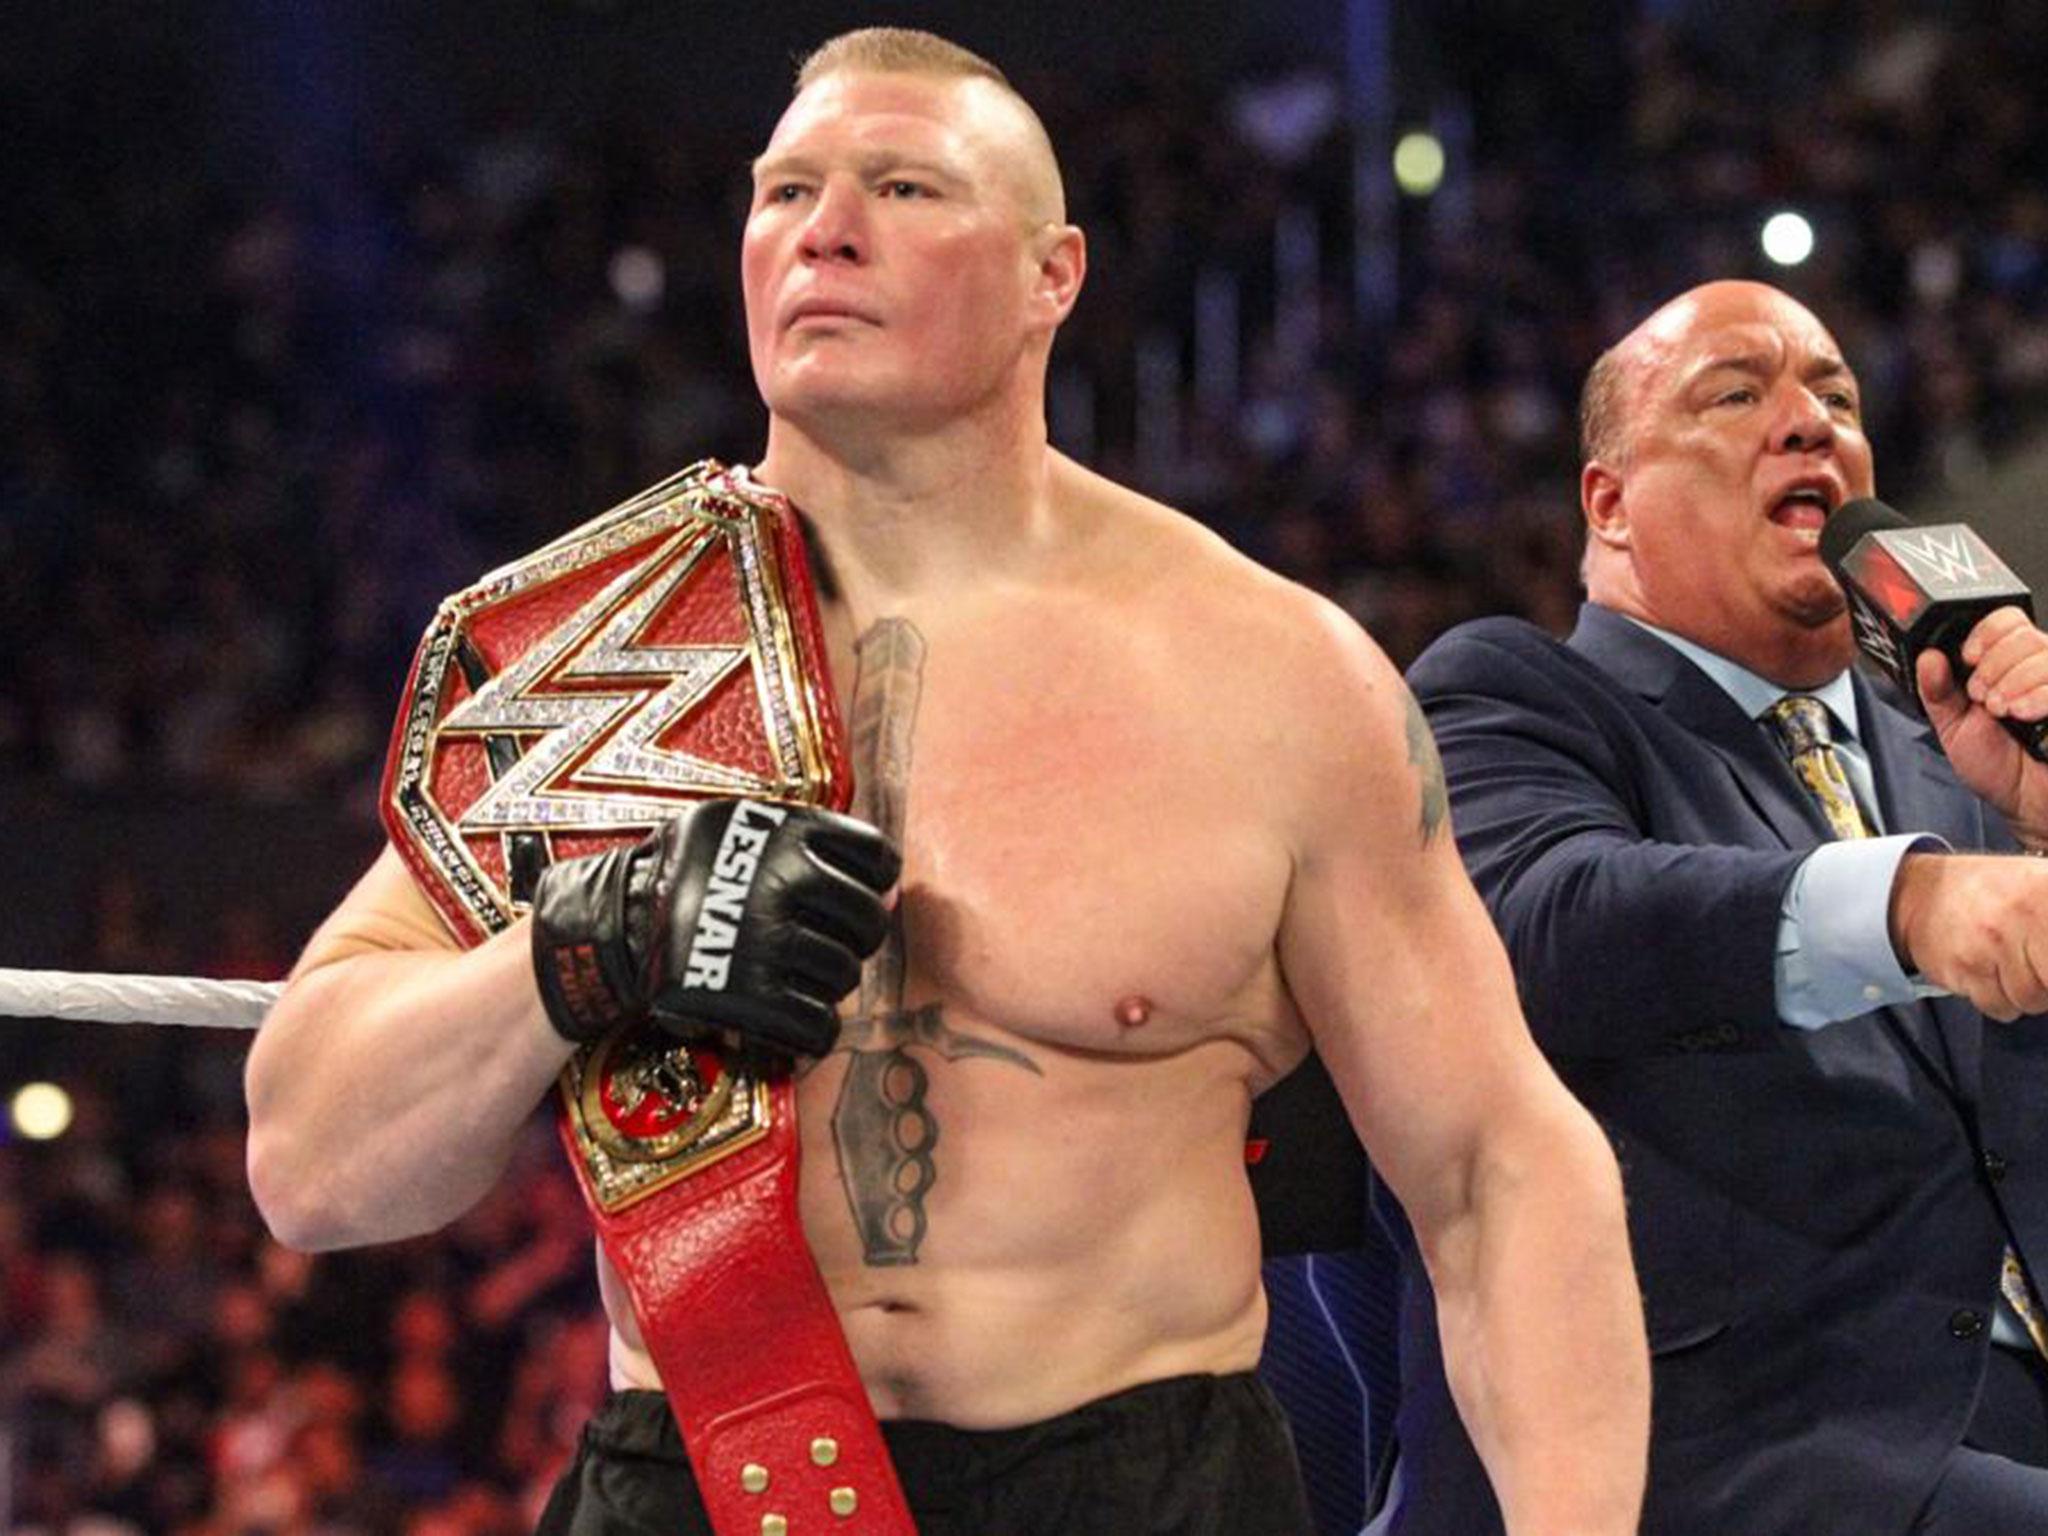 Brock Lesnar Sex Video - Paige sex tape leak caused WWE star to develop anorexia